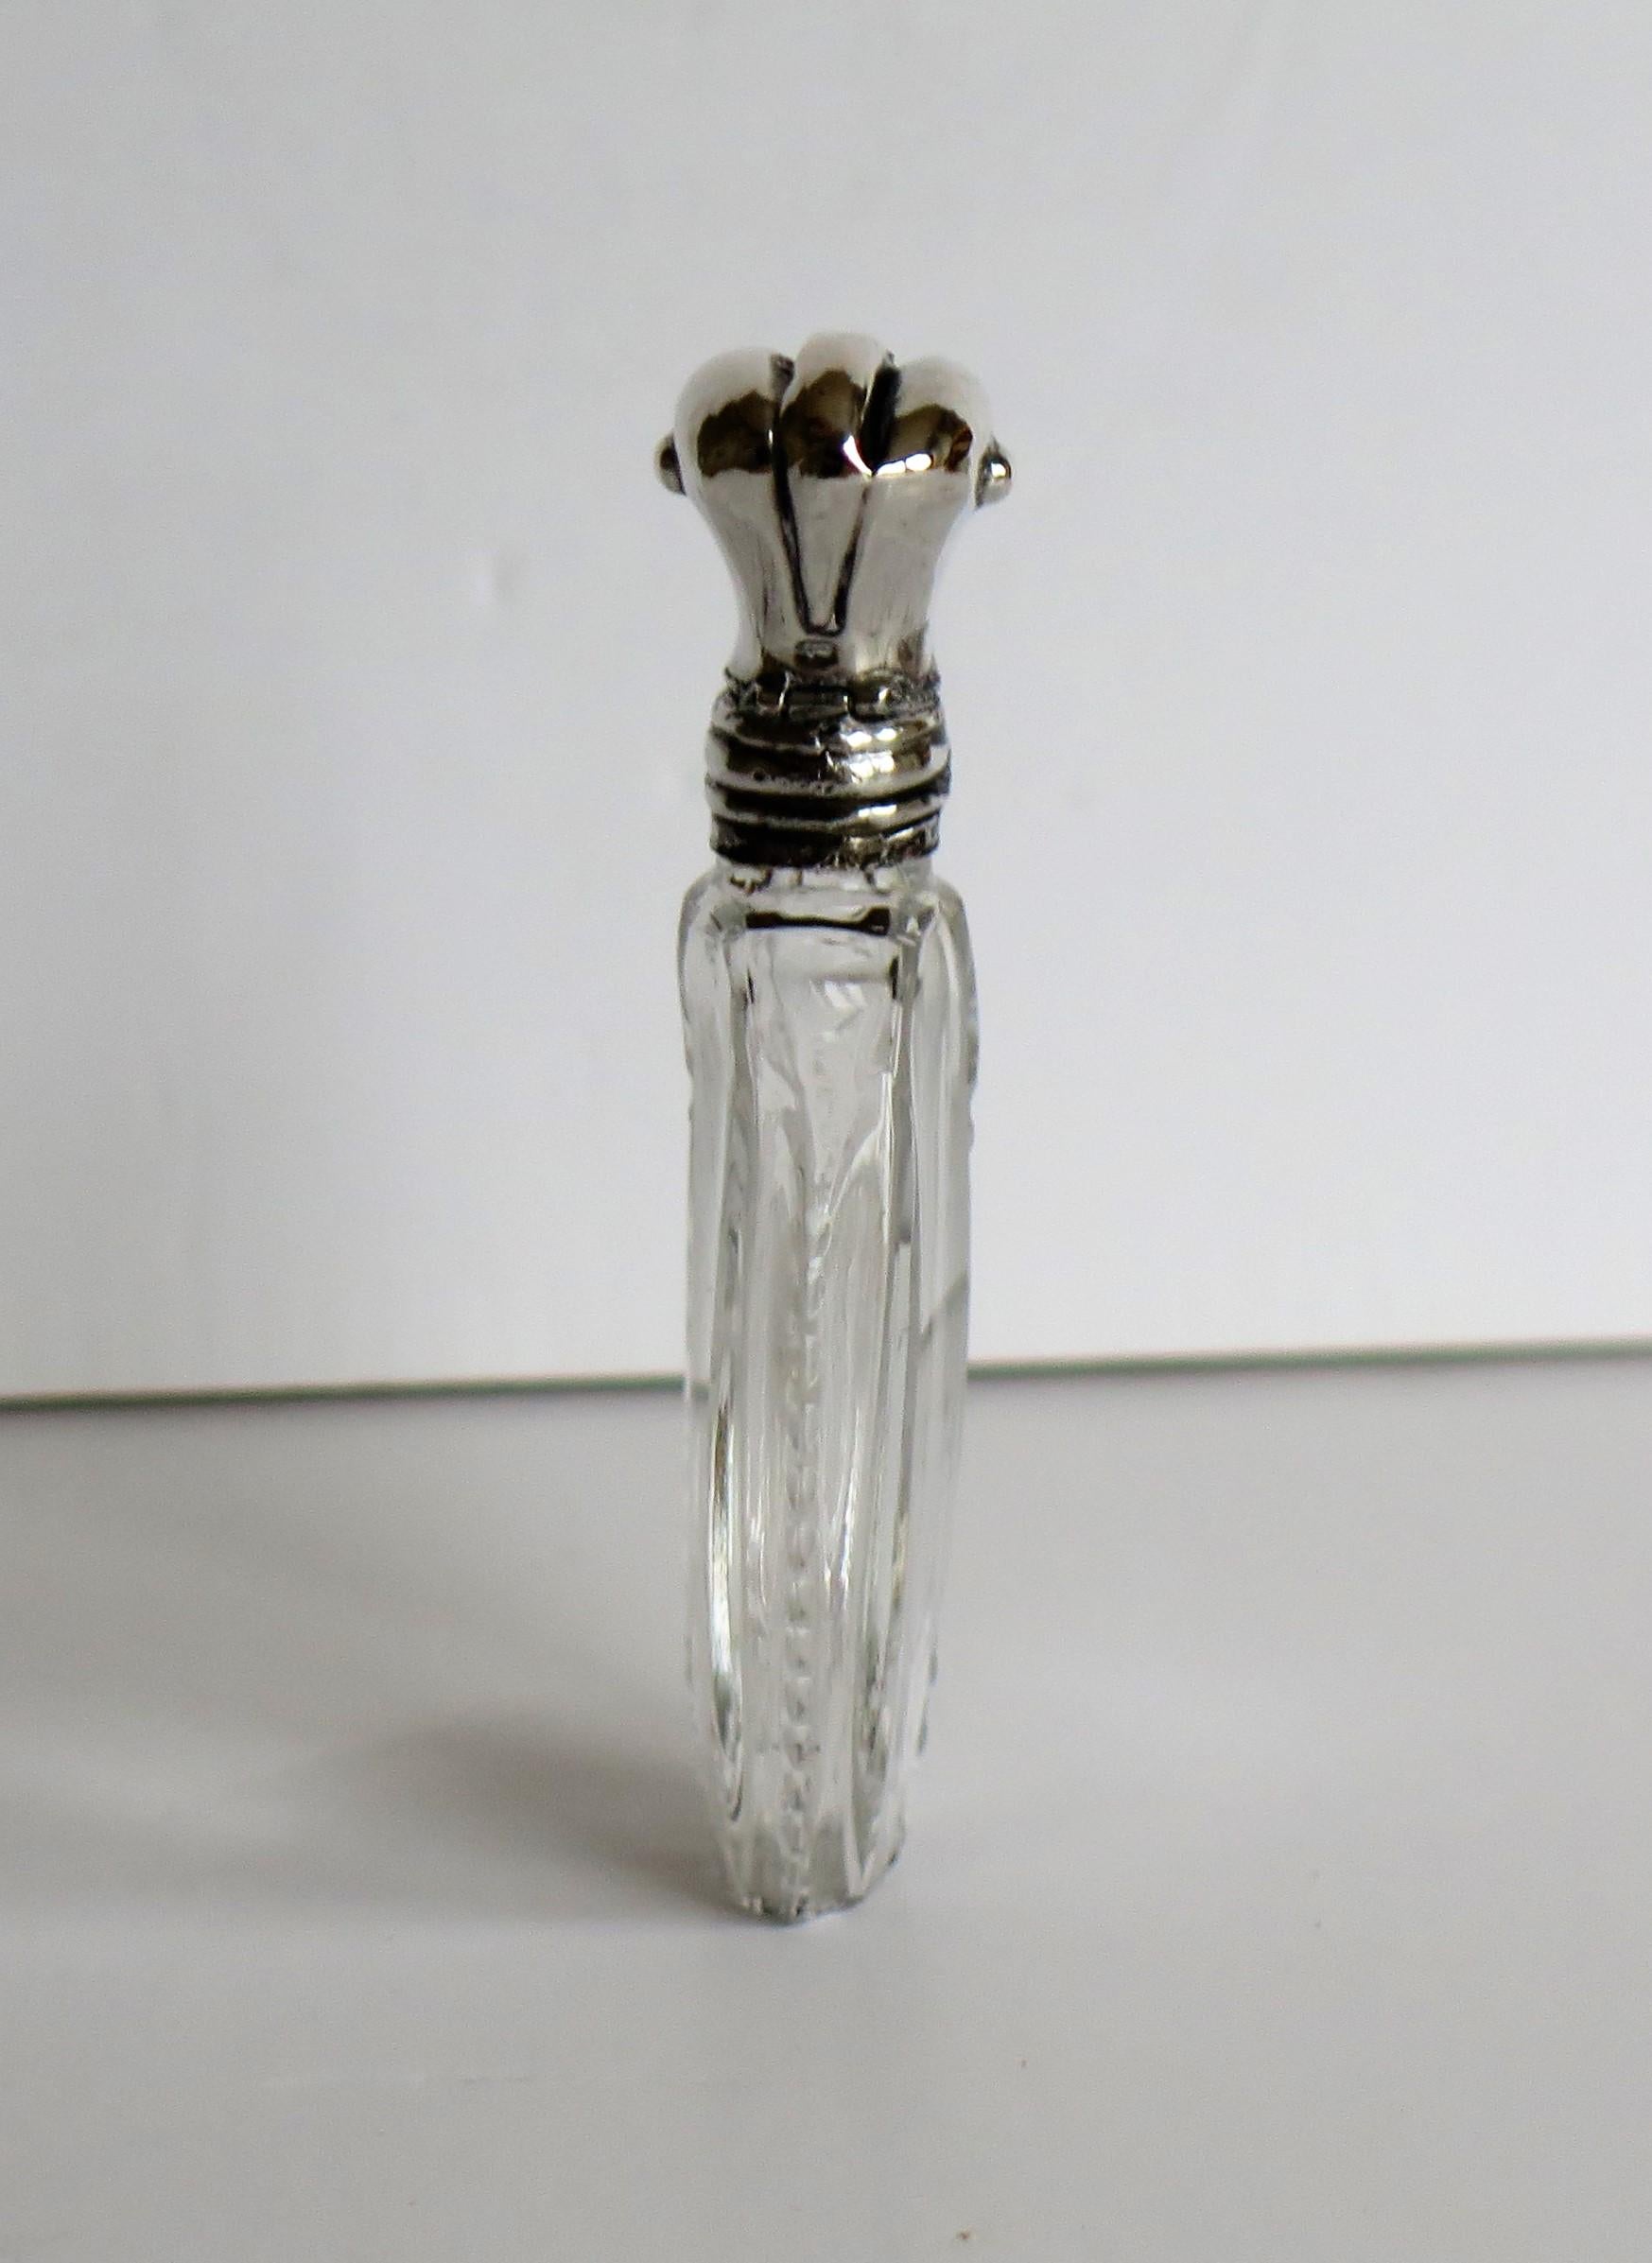 Hand-Carved Cut Crystal Glass Perfume Bottle with Silver Top, French, Late 19th Century